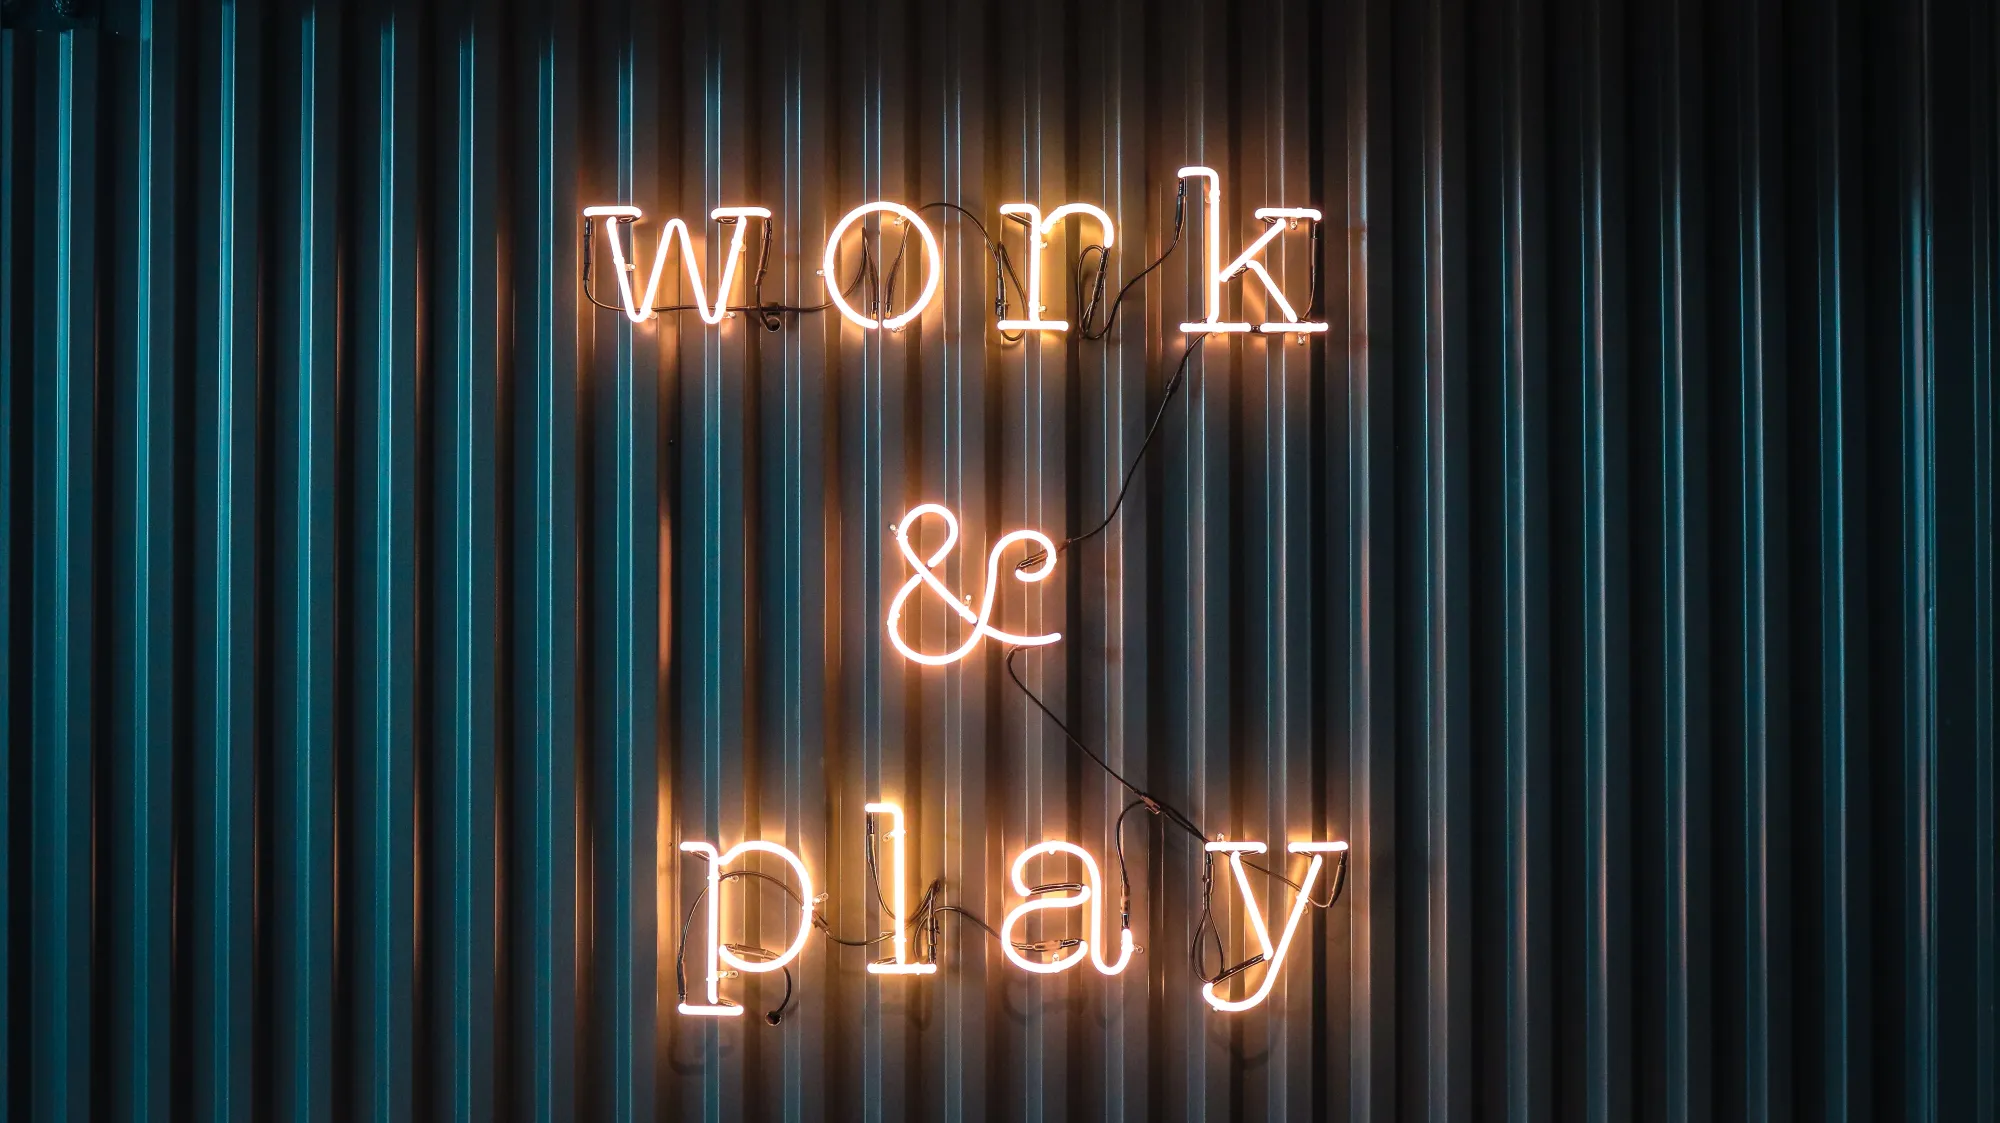 Image of a sign saying "work and play"